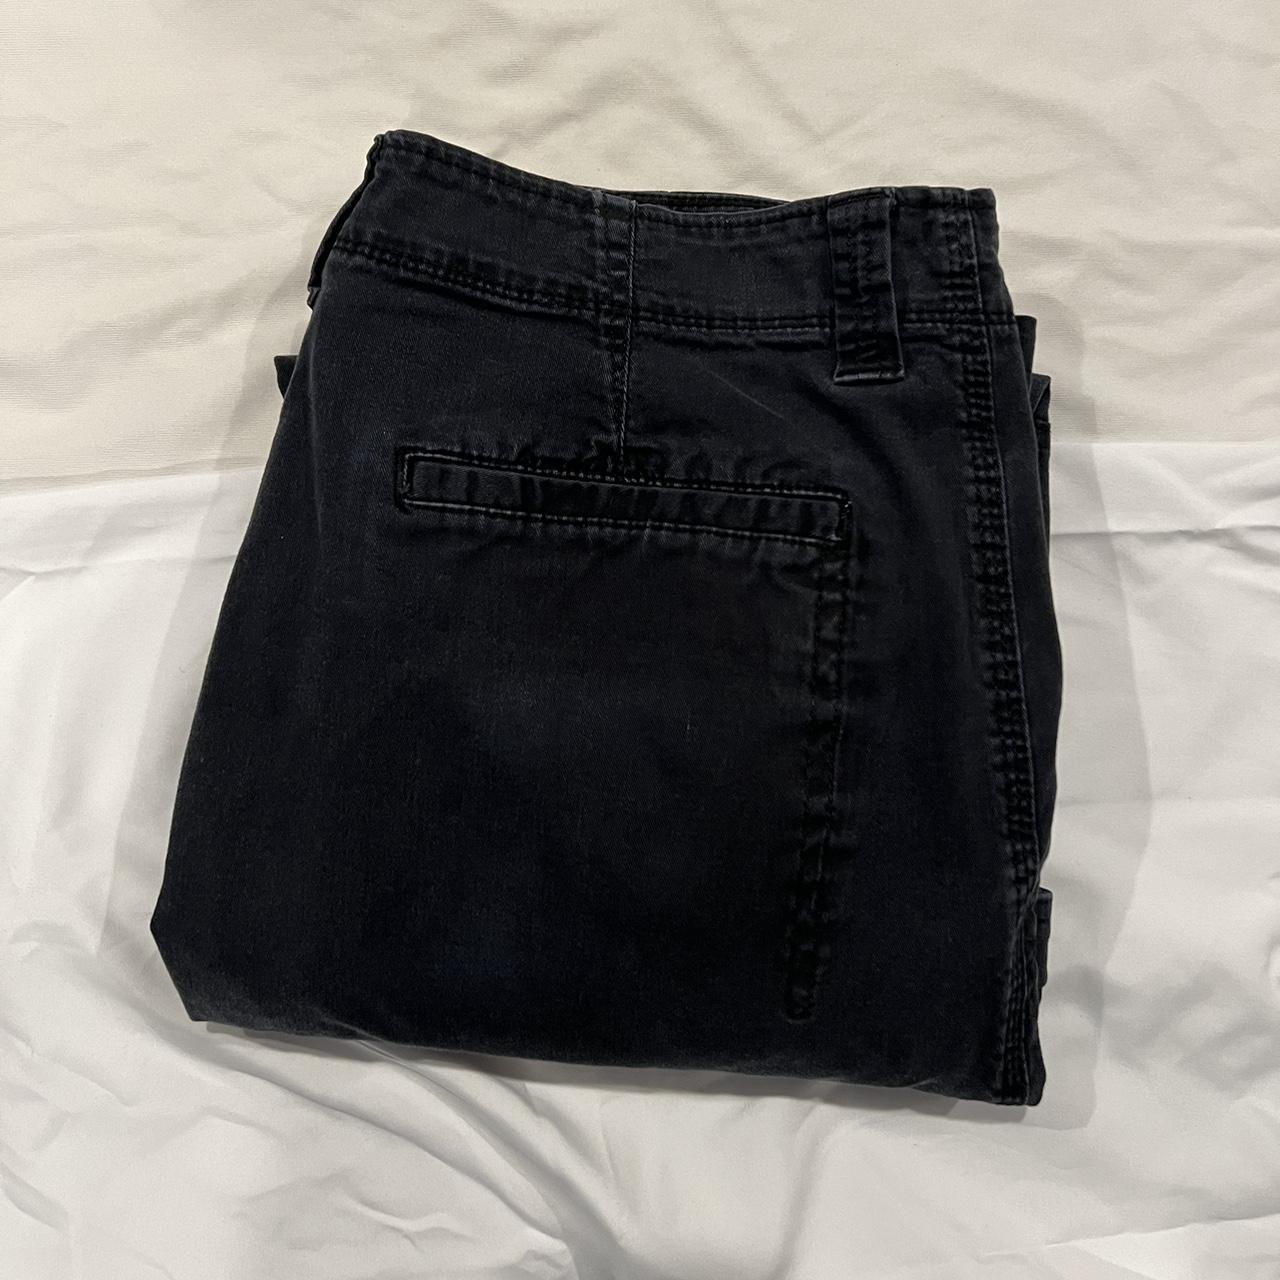 Wrangler relax fit cargos size: 32 X 32 ( can fit a... - Depop